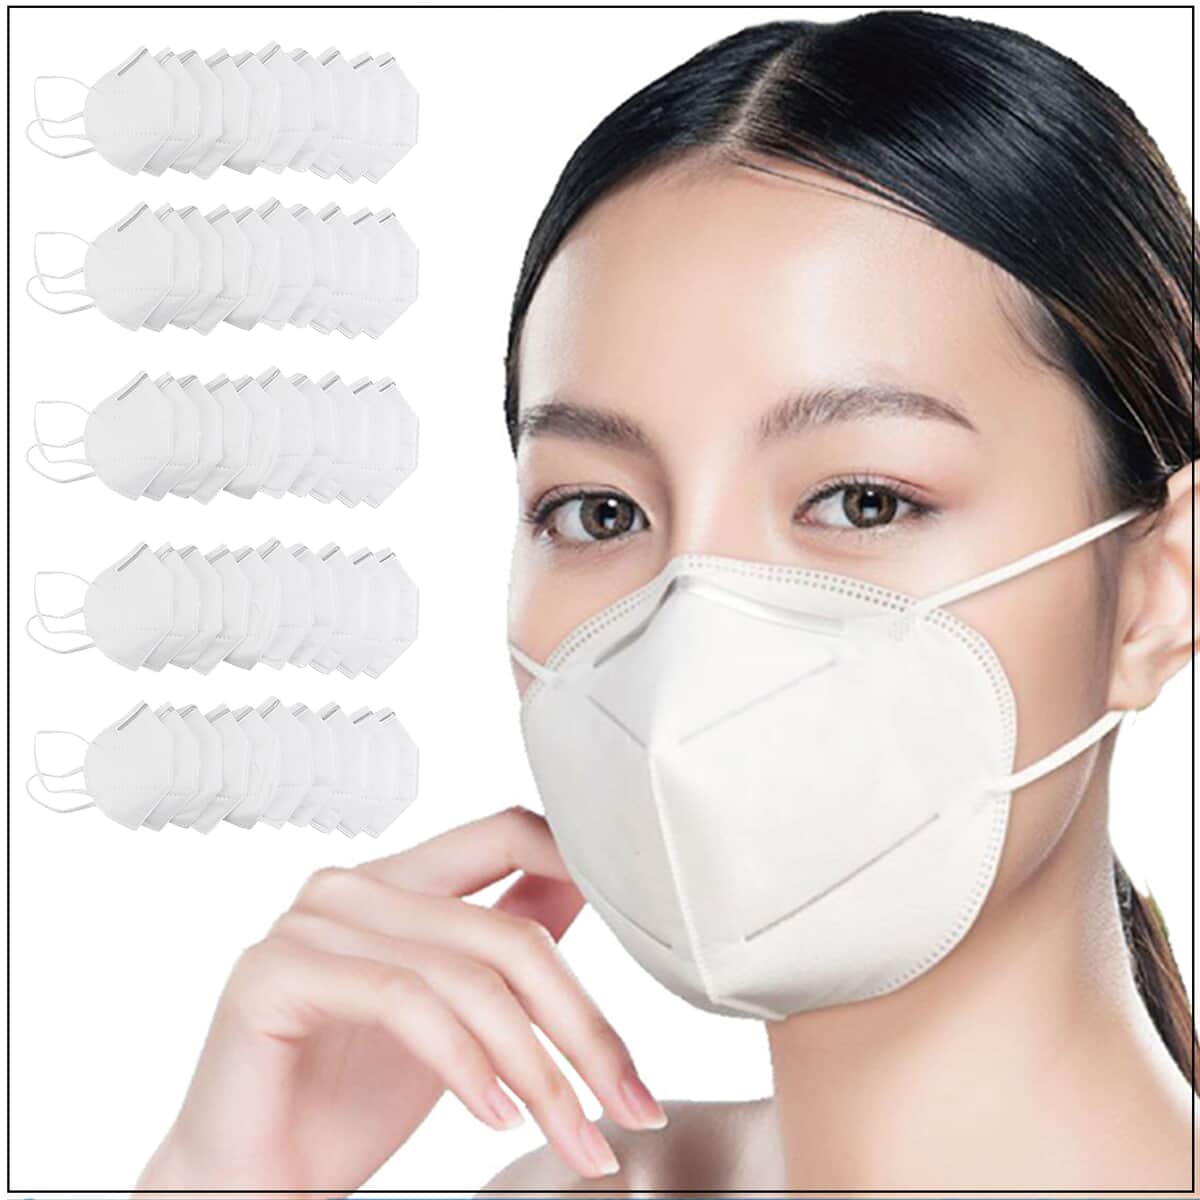 Set of 50 KN95 Disposable Protection Masks 5 Layer Non- Returnable image number 1